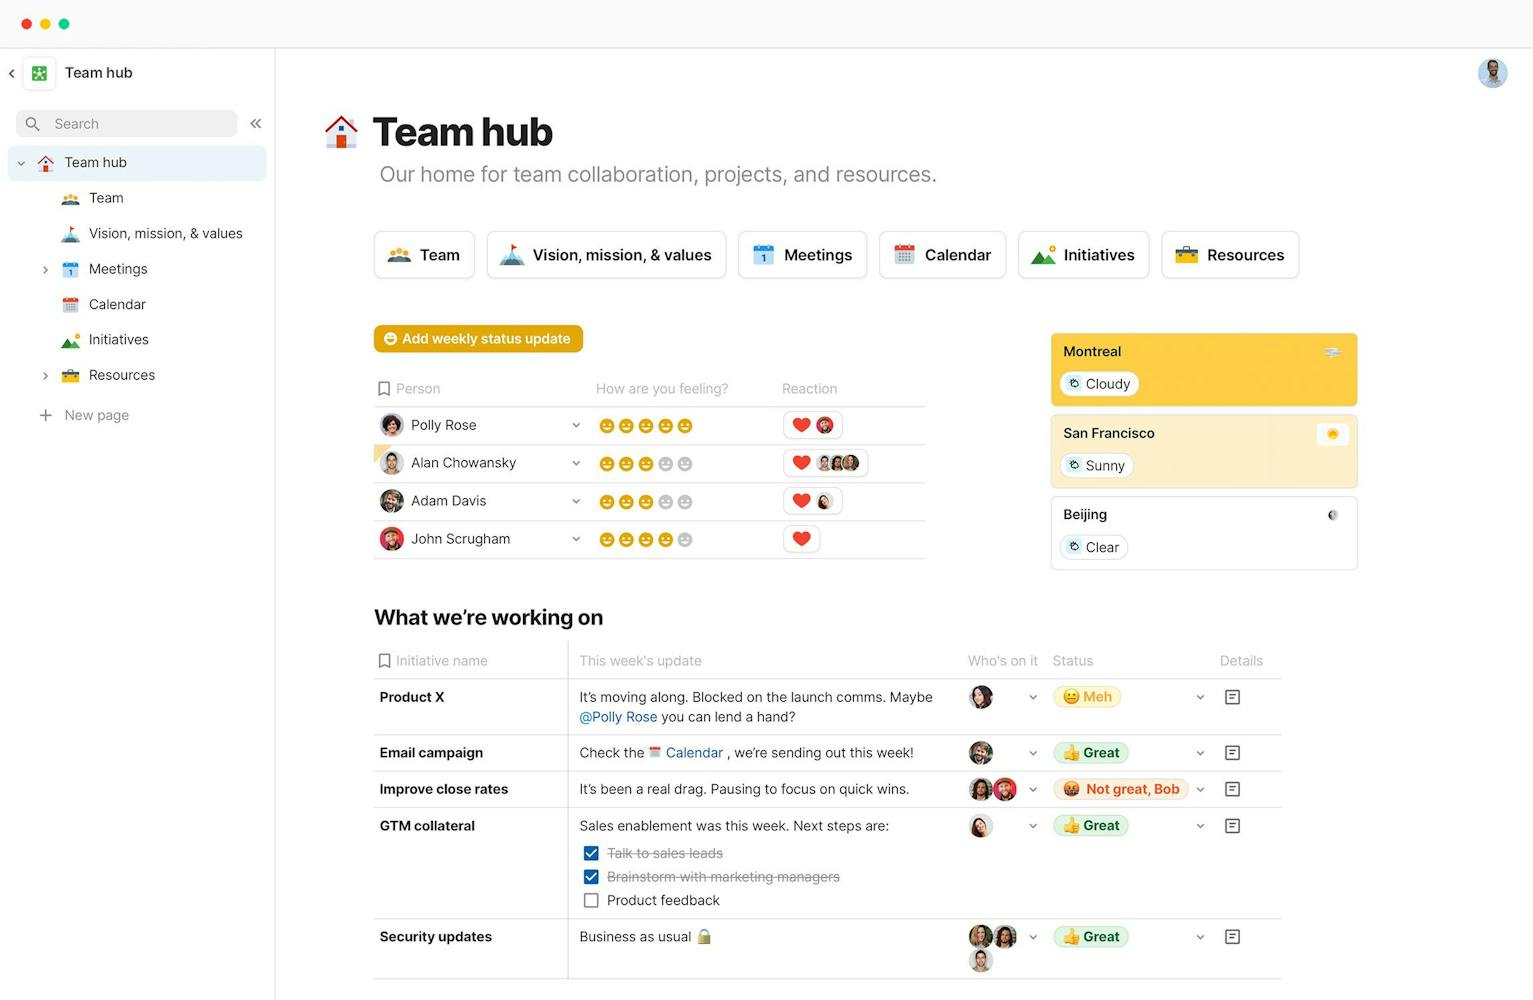 Screenshot of a Team Hub in Coda - includes a list of teammates and details for projects the team is working on.